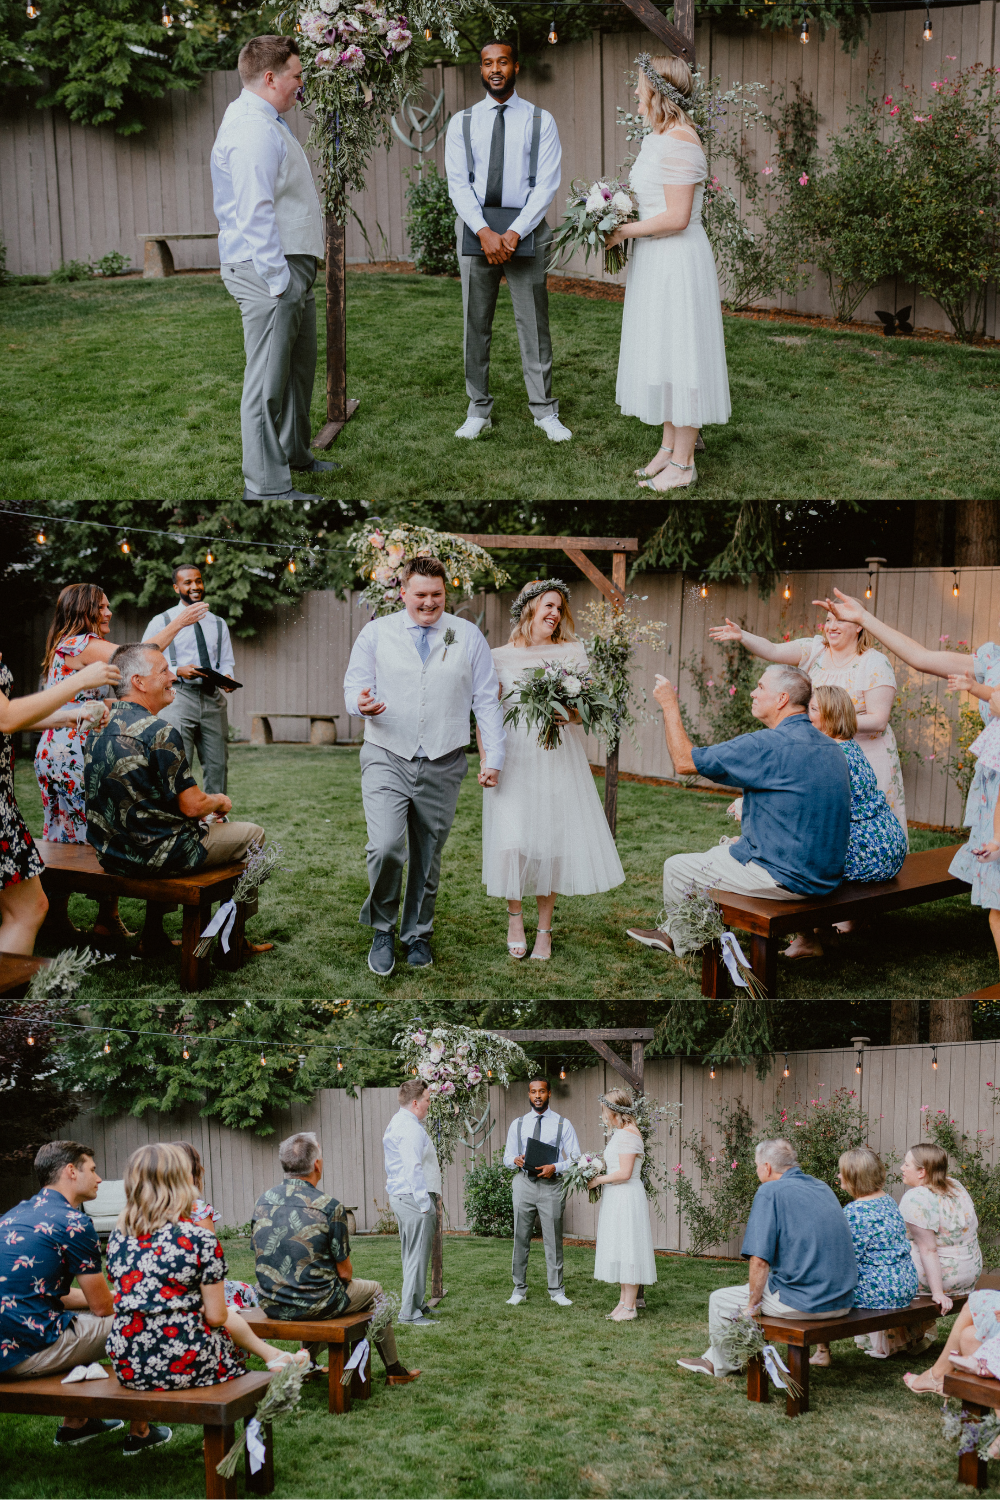 Bride and Groom exchange vows in intimate backyard elopement, Bride and Groom walk down the aisle while family celebrate | Seattle Wedding Photographer, Seattle Elopement Photographer | chelseaabril.com